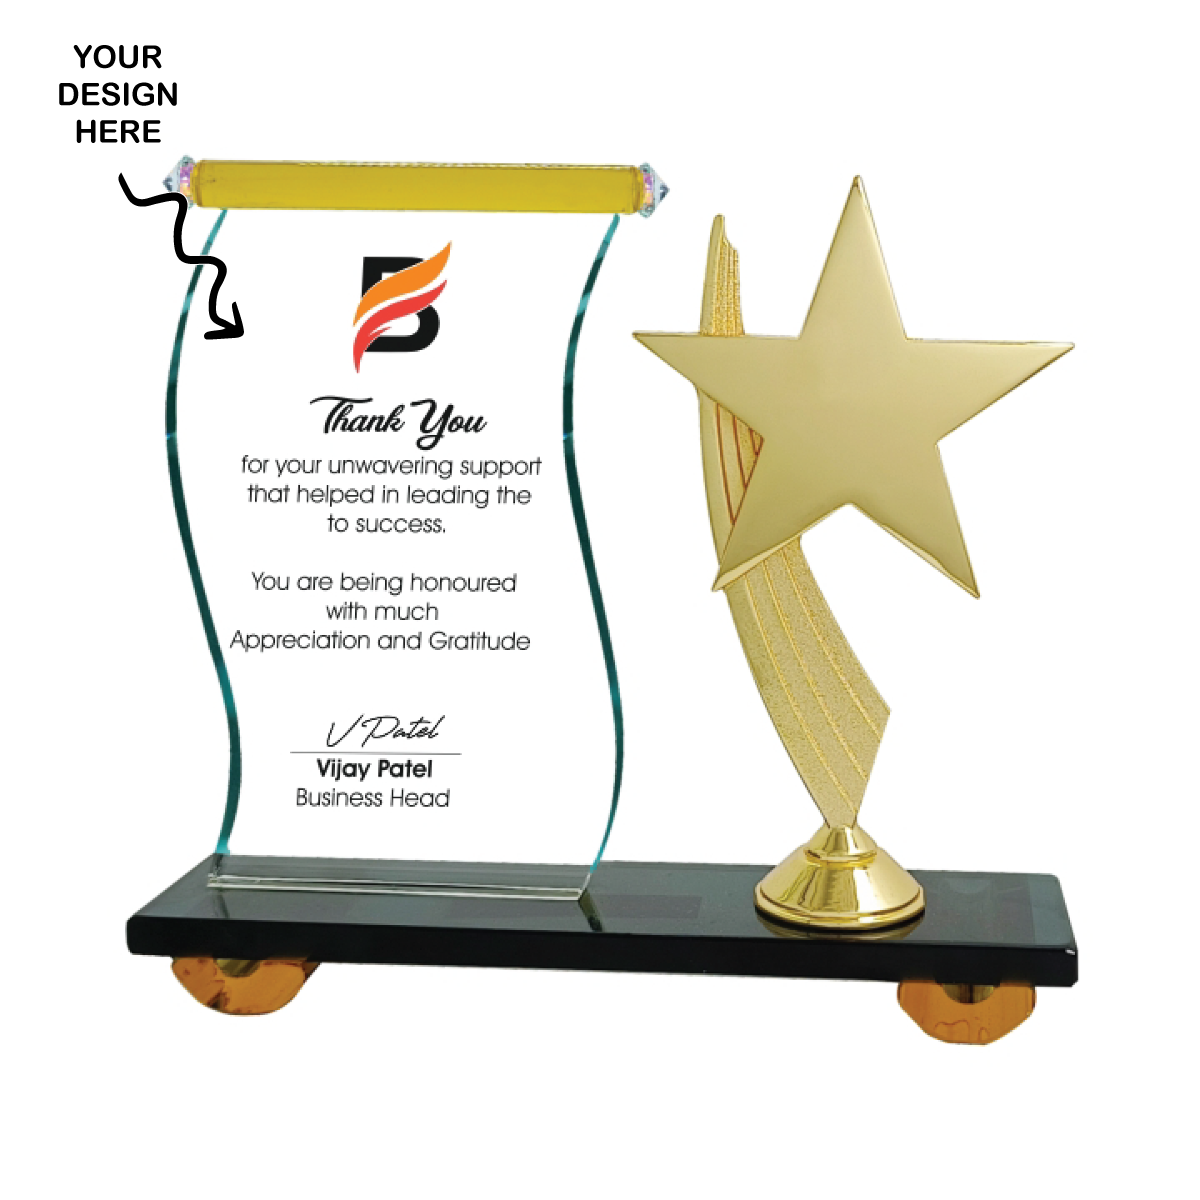 Personalized Starfish Crystal Award Trophy - For Employee Recognition, Corporate Gifting, Award Shows, Sports Event, Competition, Students Reward - MA496